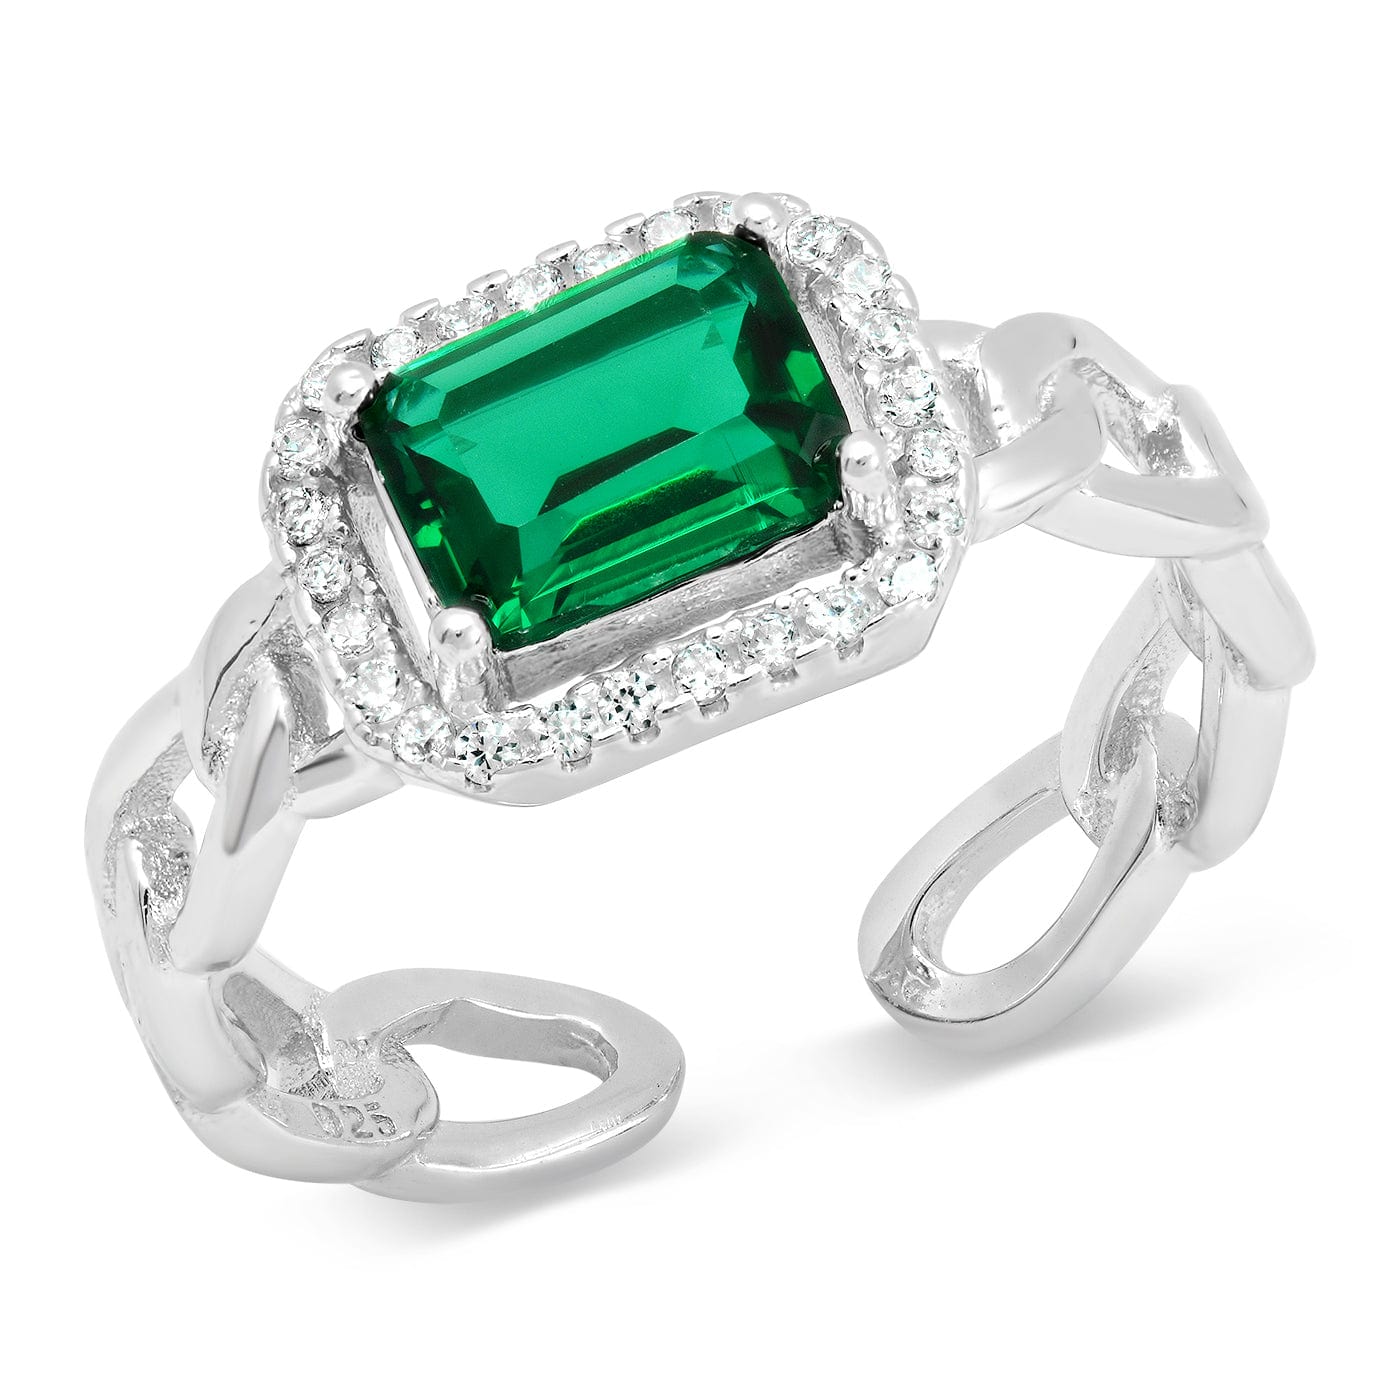 TAI JEWELRY Rings 6 / Silver/Emerald East West Ring